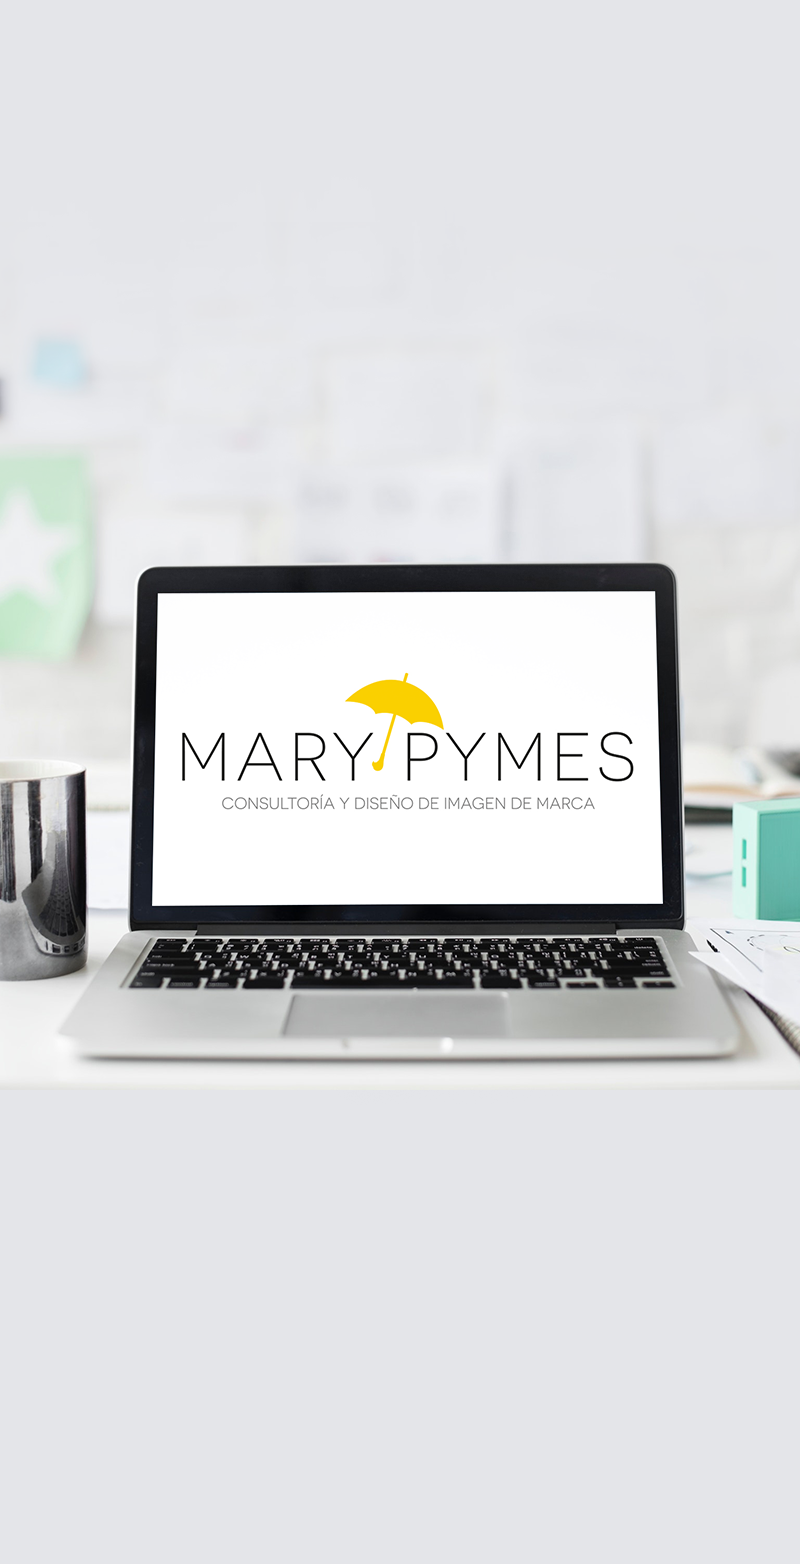 MARY PYMES